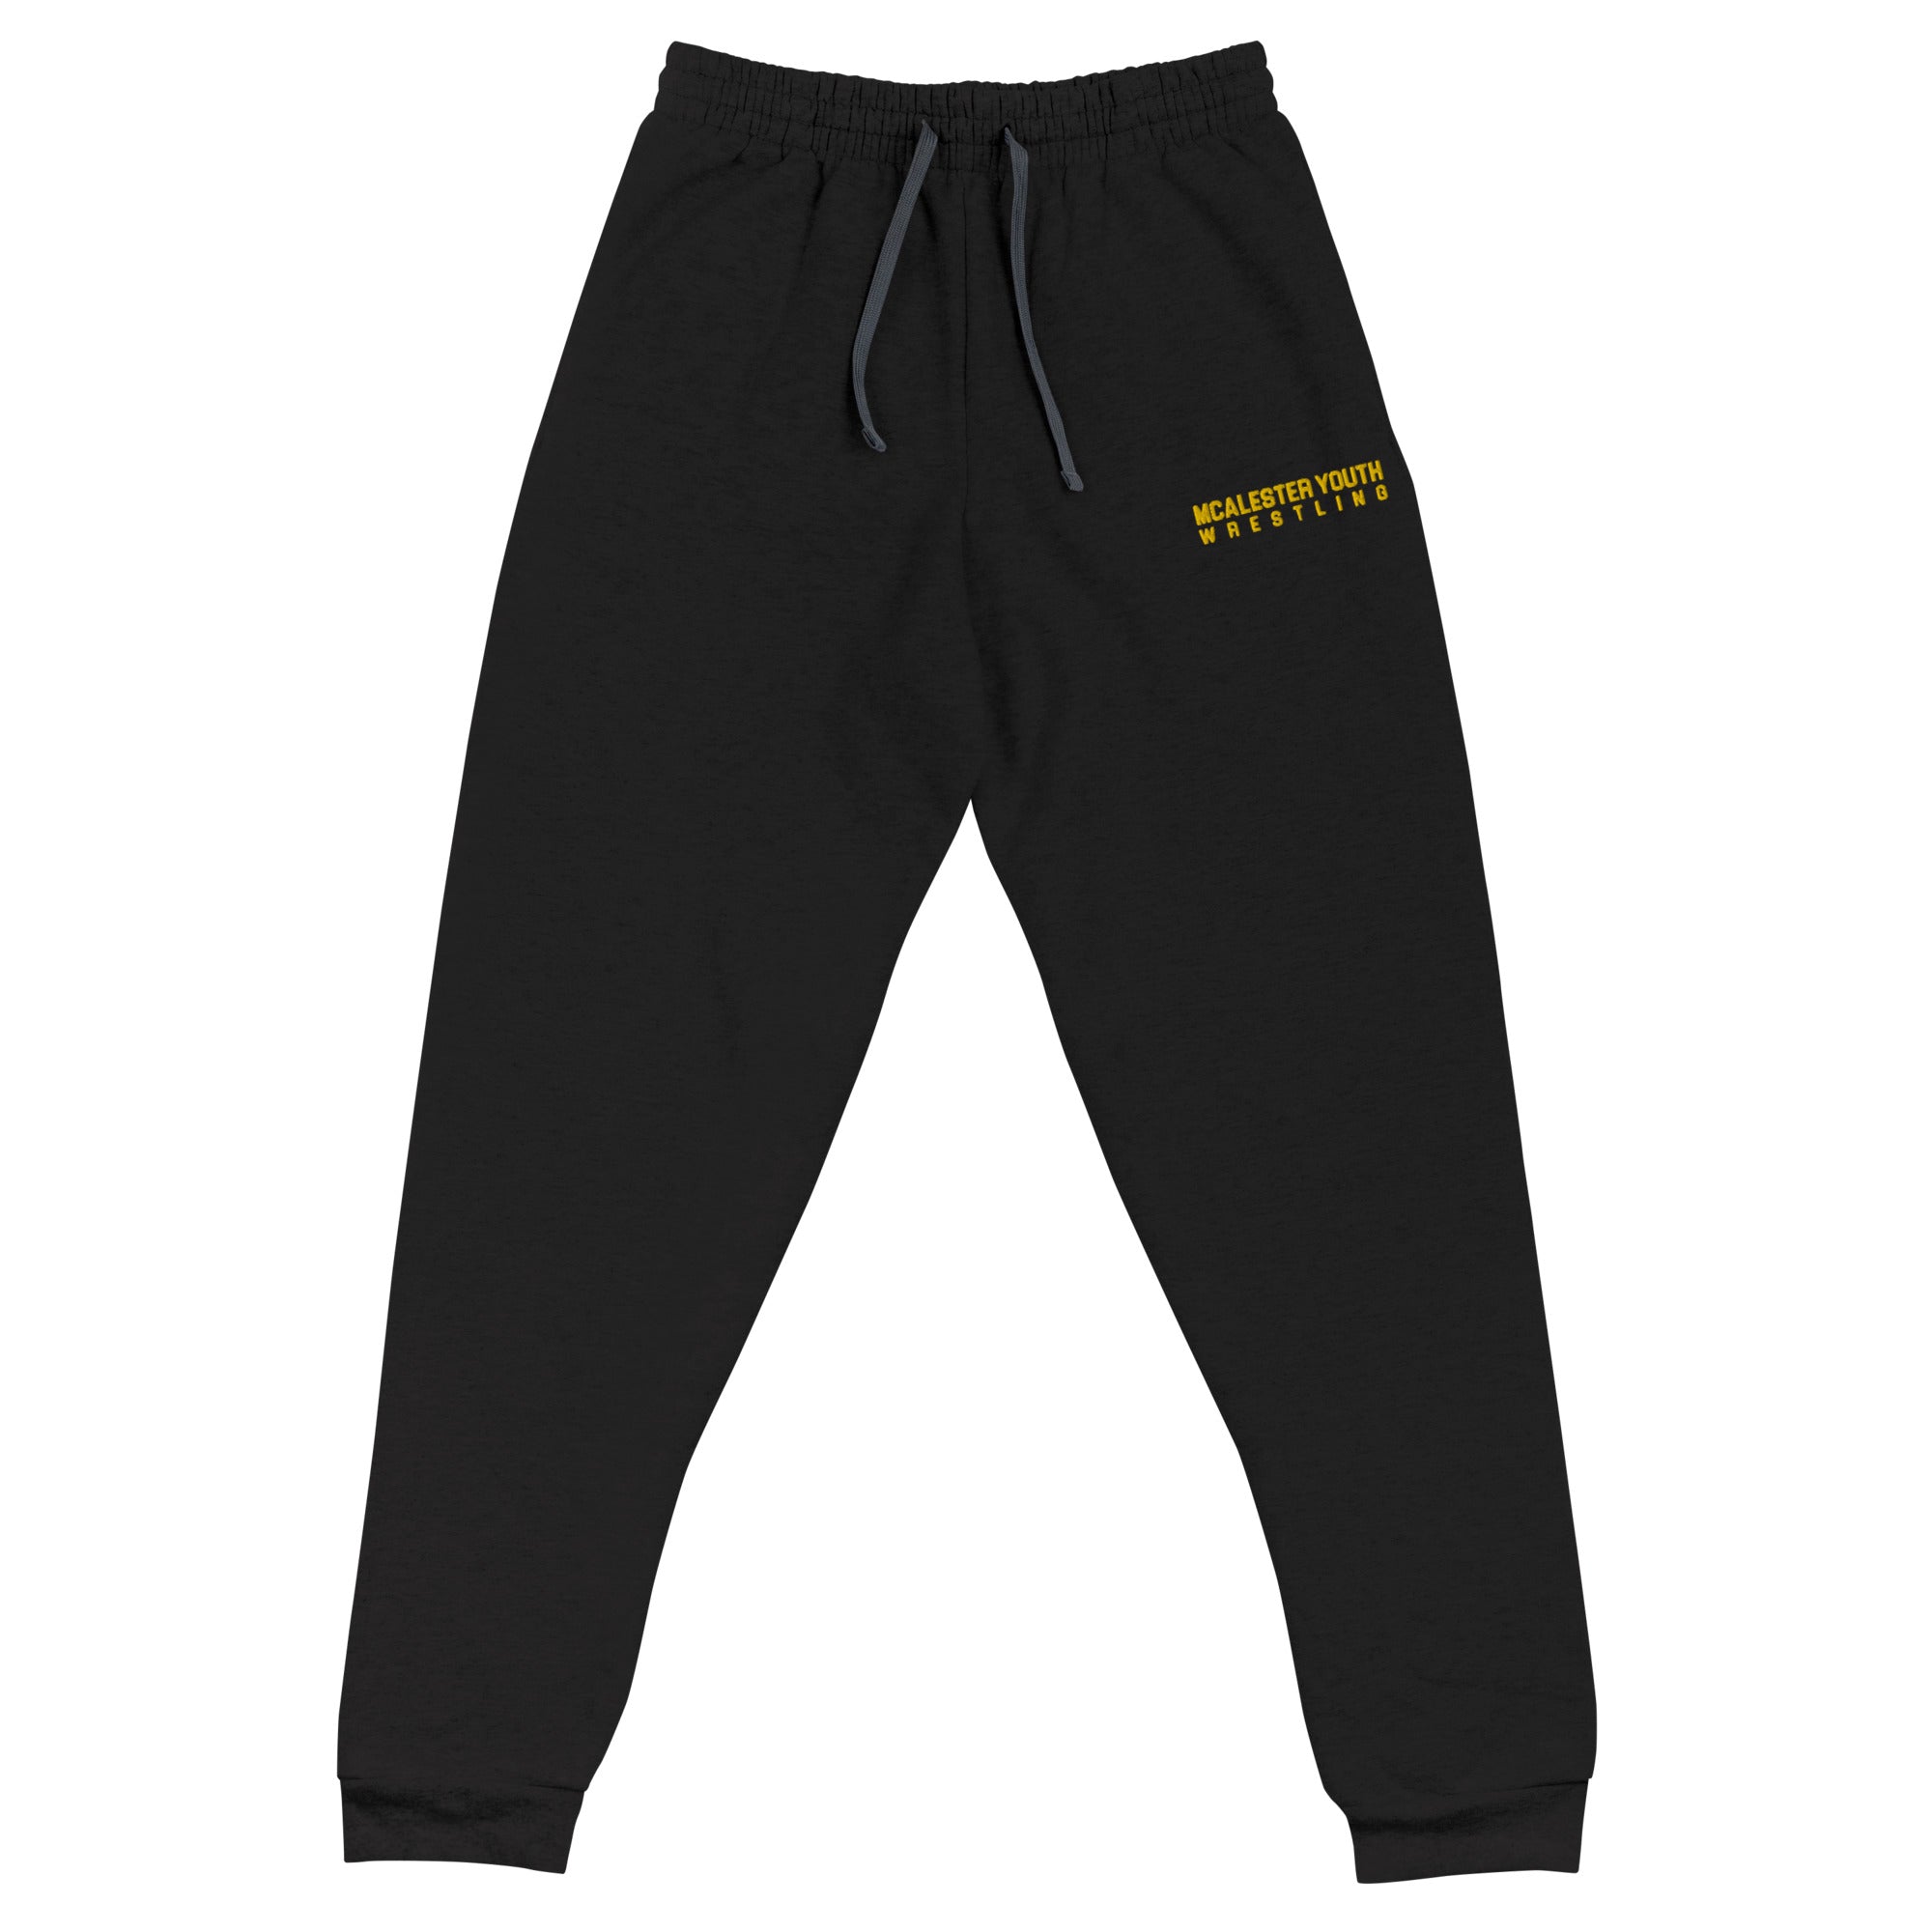 McAlester Youth Wrestling Unisex Joggers